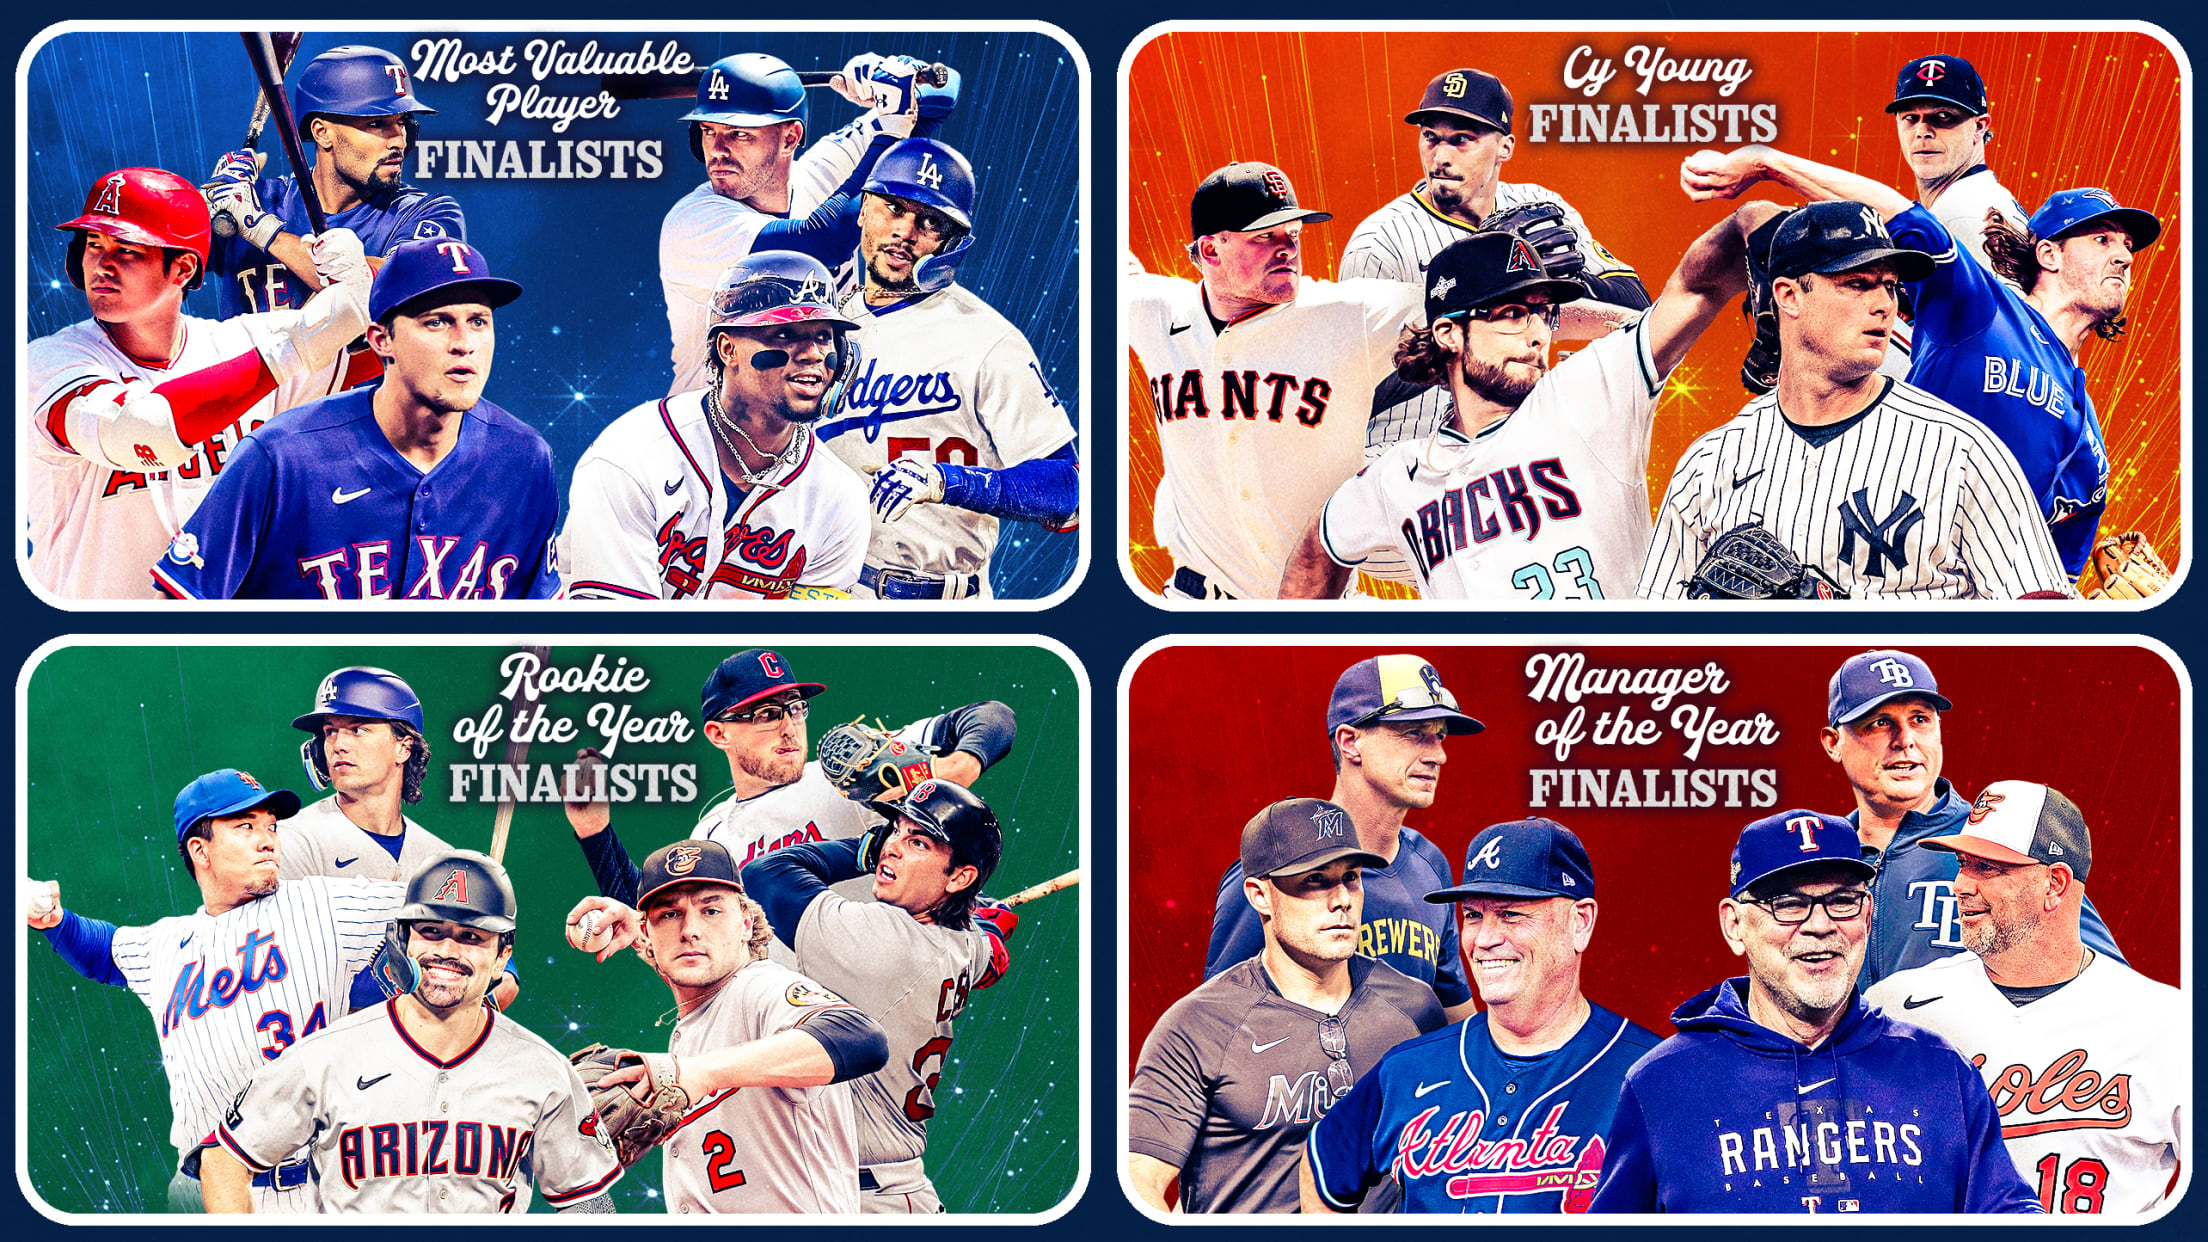 One box for each of the four major BBWAA awards features pics of the three finalists in each league for the corresponding award